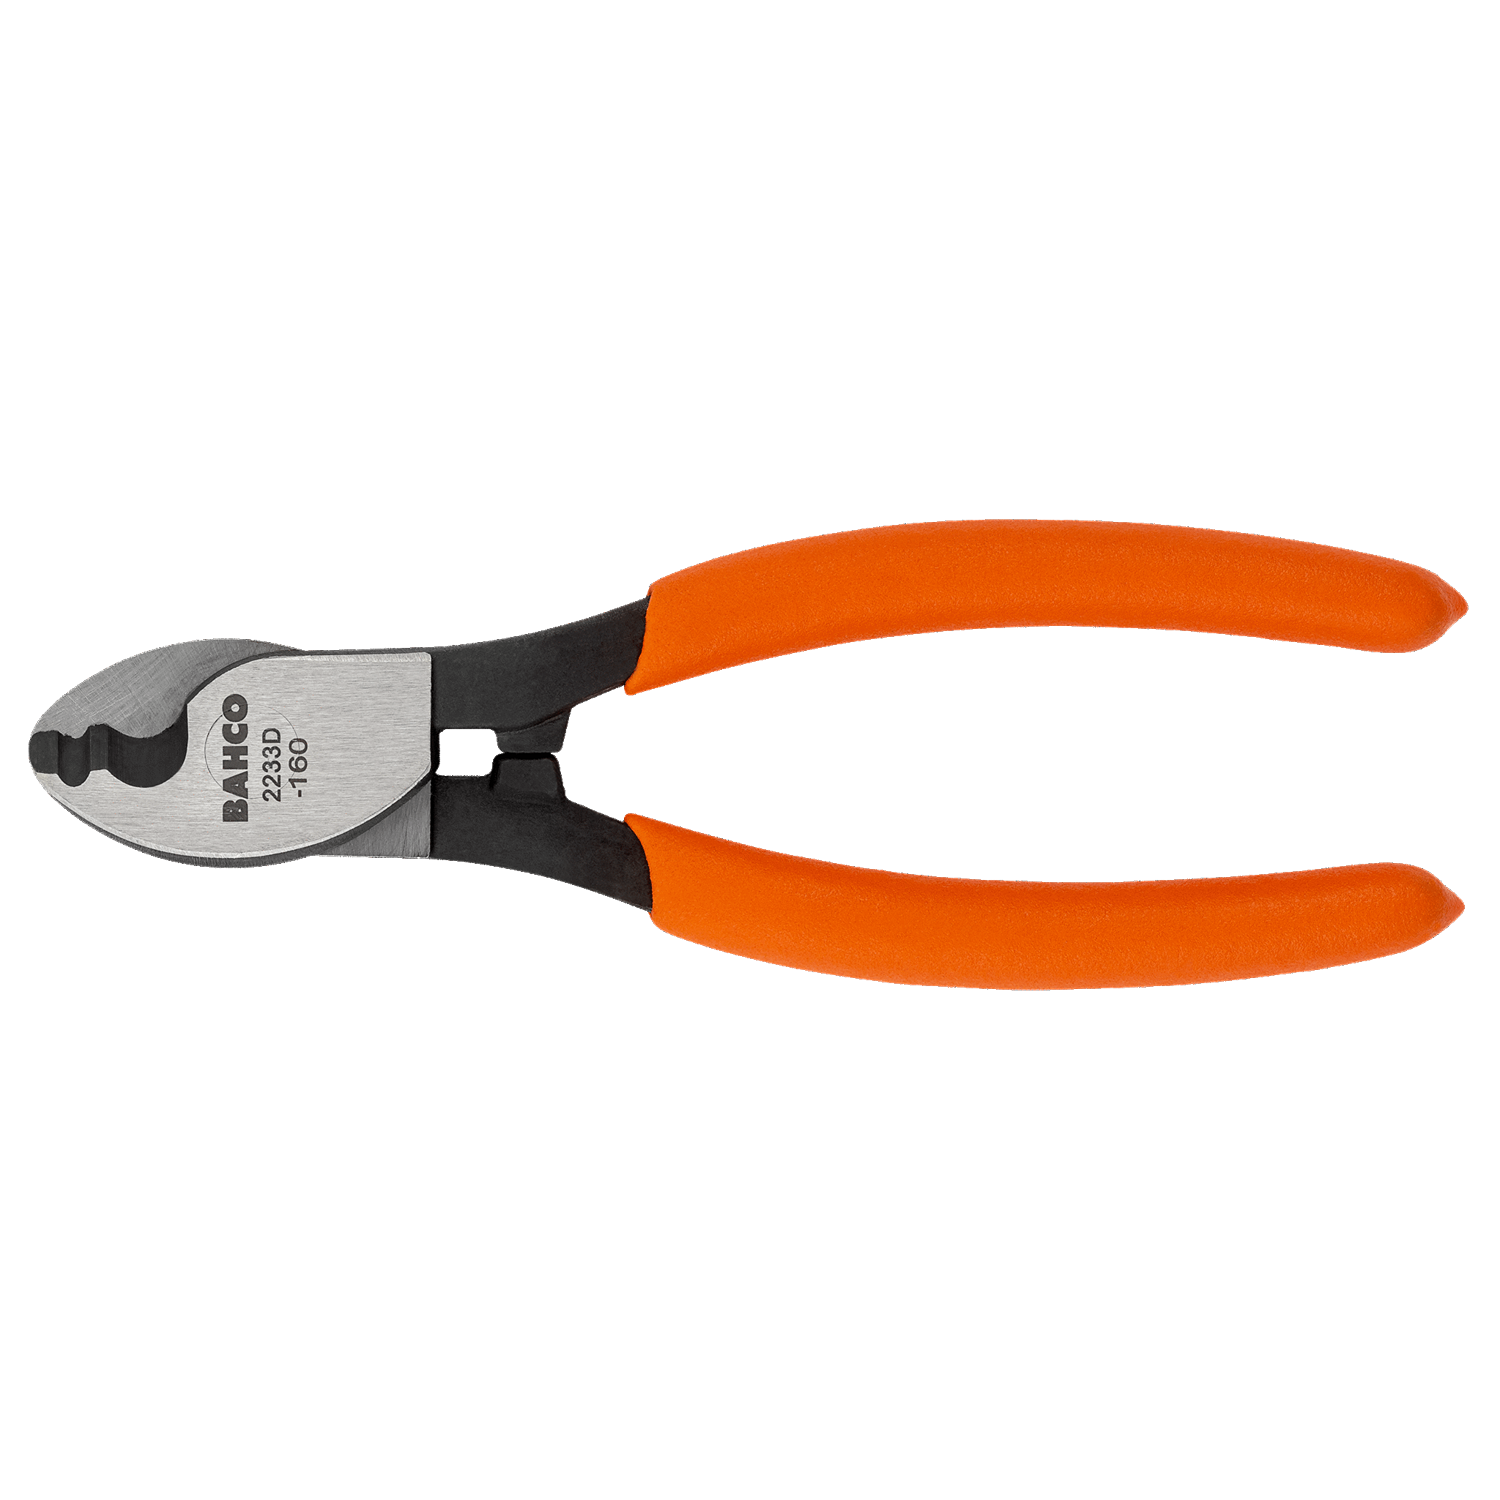 BAHCO 2233D Cable Cutting Plier with PVC Coated Handles - Premium Cutting Plier from BAHCO - Shop now at Yew Aik.